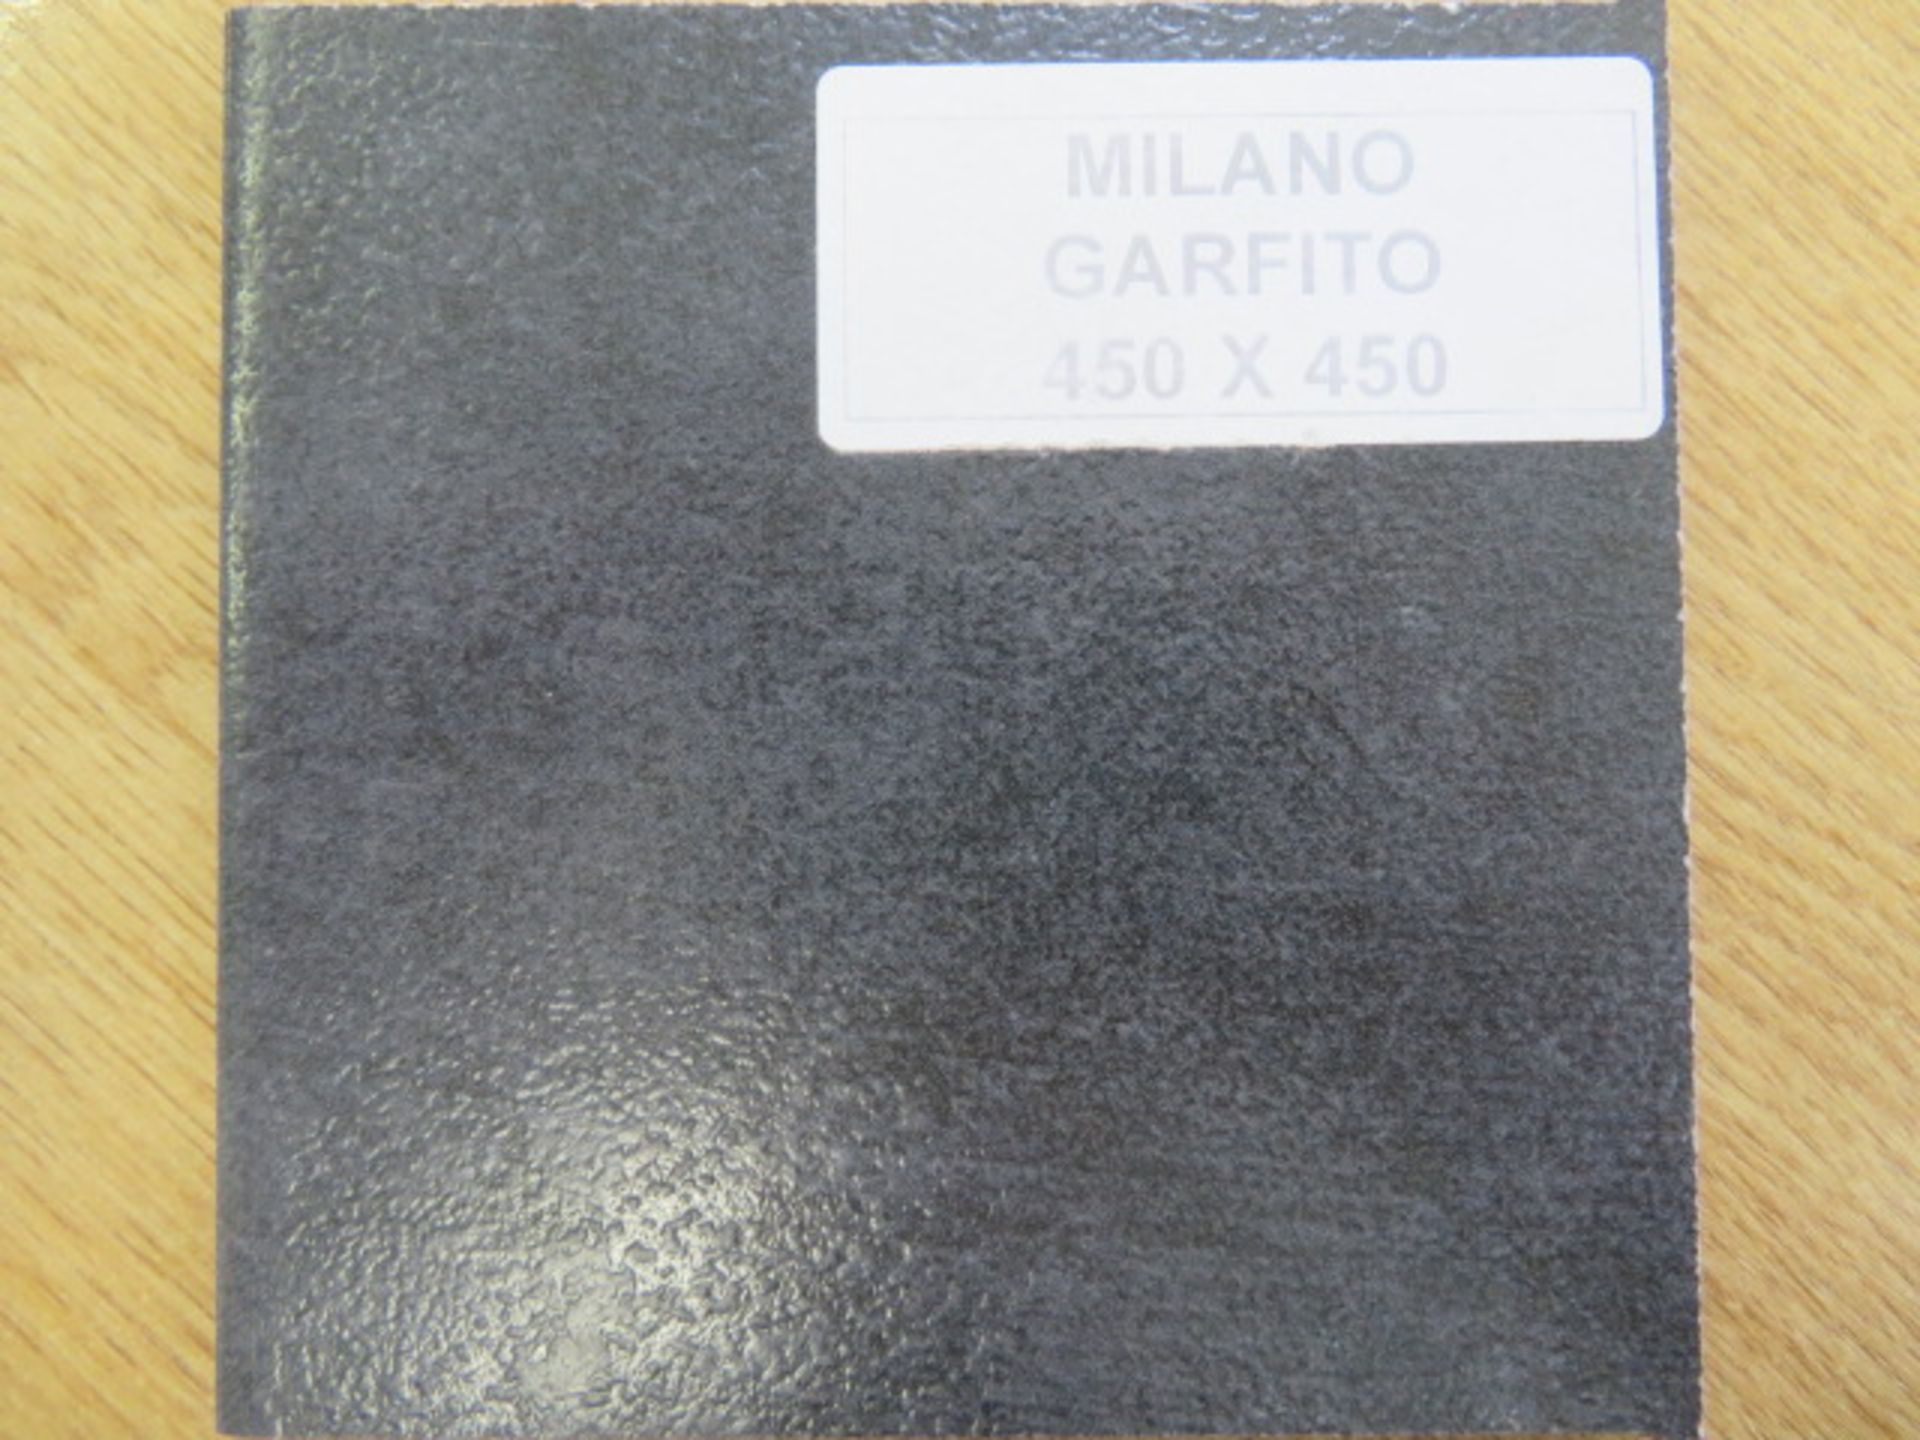 NEW 8.25 Square Meters of Milano Garfito Wall and Floor Tiles. 450x450mm per tile, 10mm Thick.... - Image 3 of 4